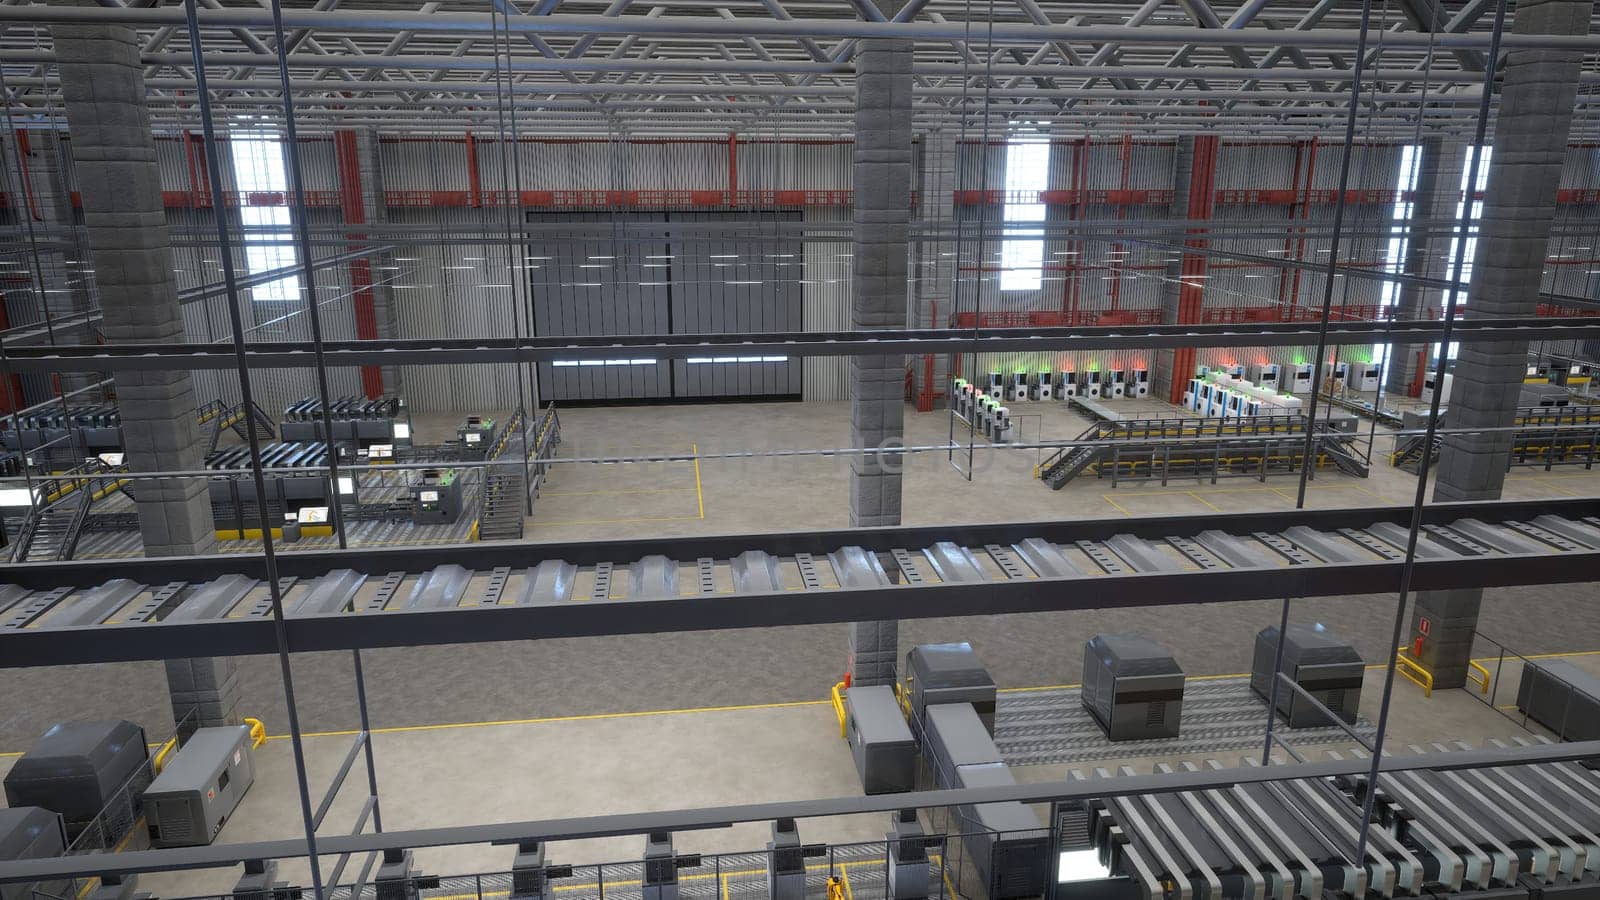 Industrial factory showcasing rows of high tech machines and assembly lines, 3D rendering. Manufacturing equipment in empty logistics depot with automatized processes and tasks